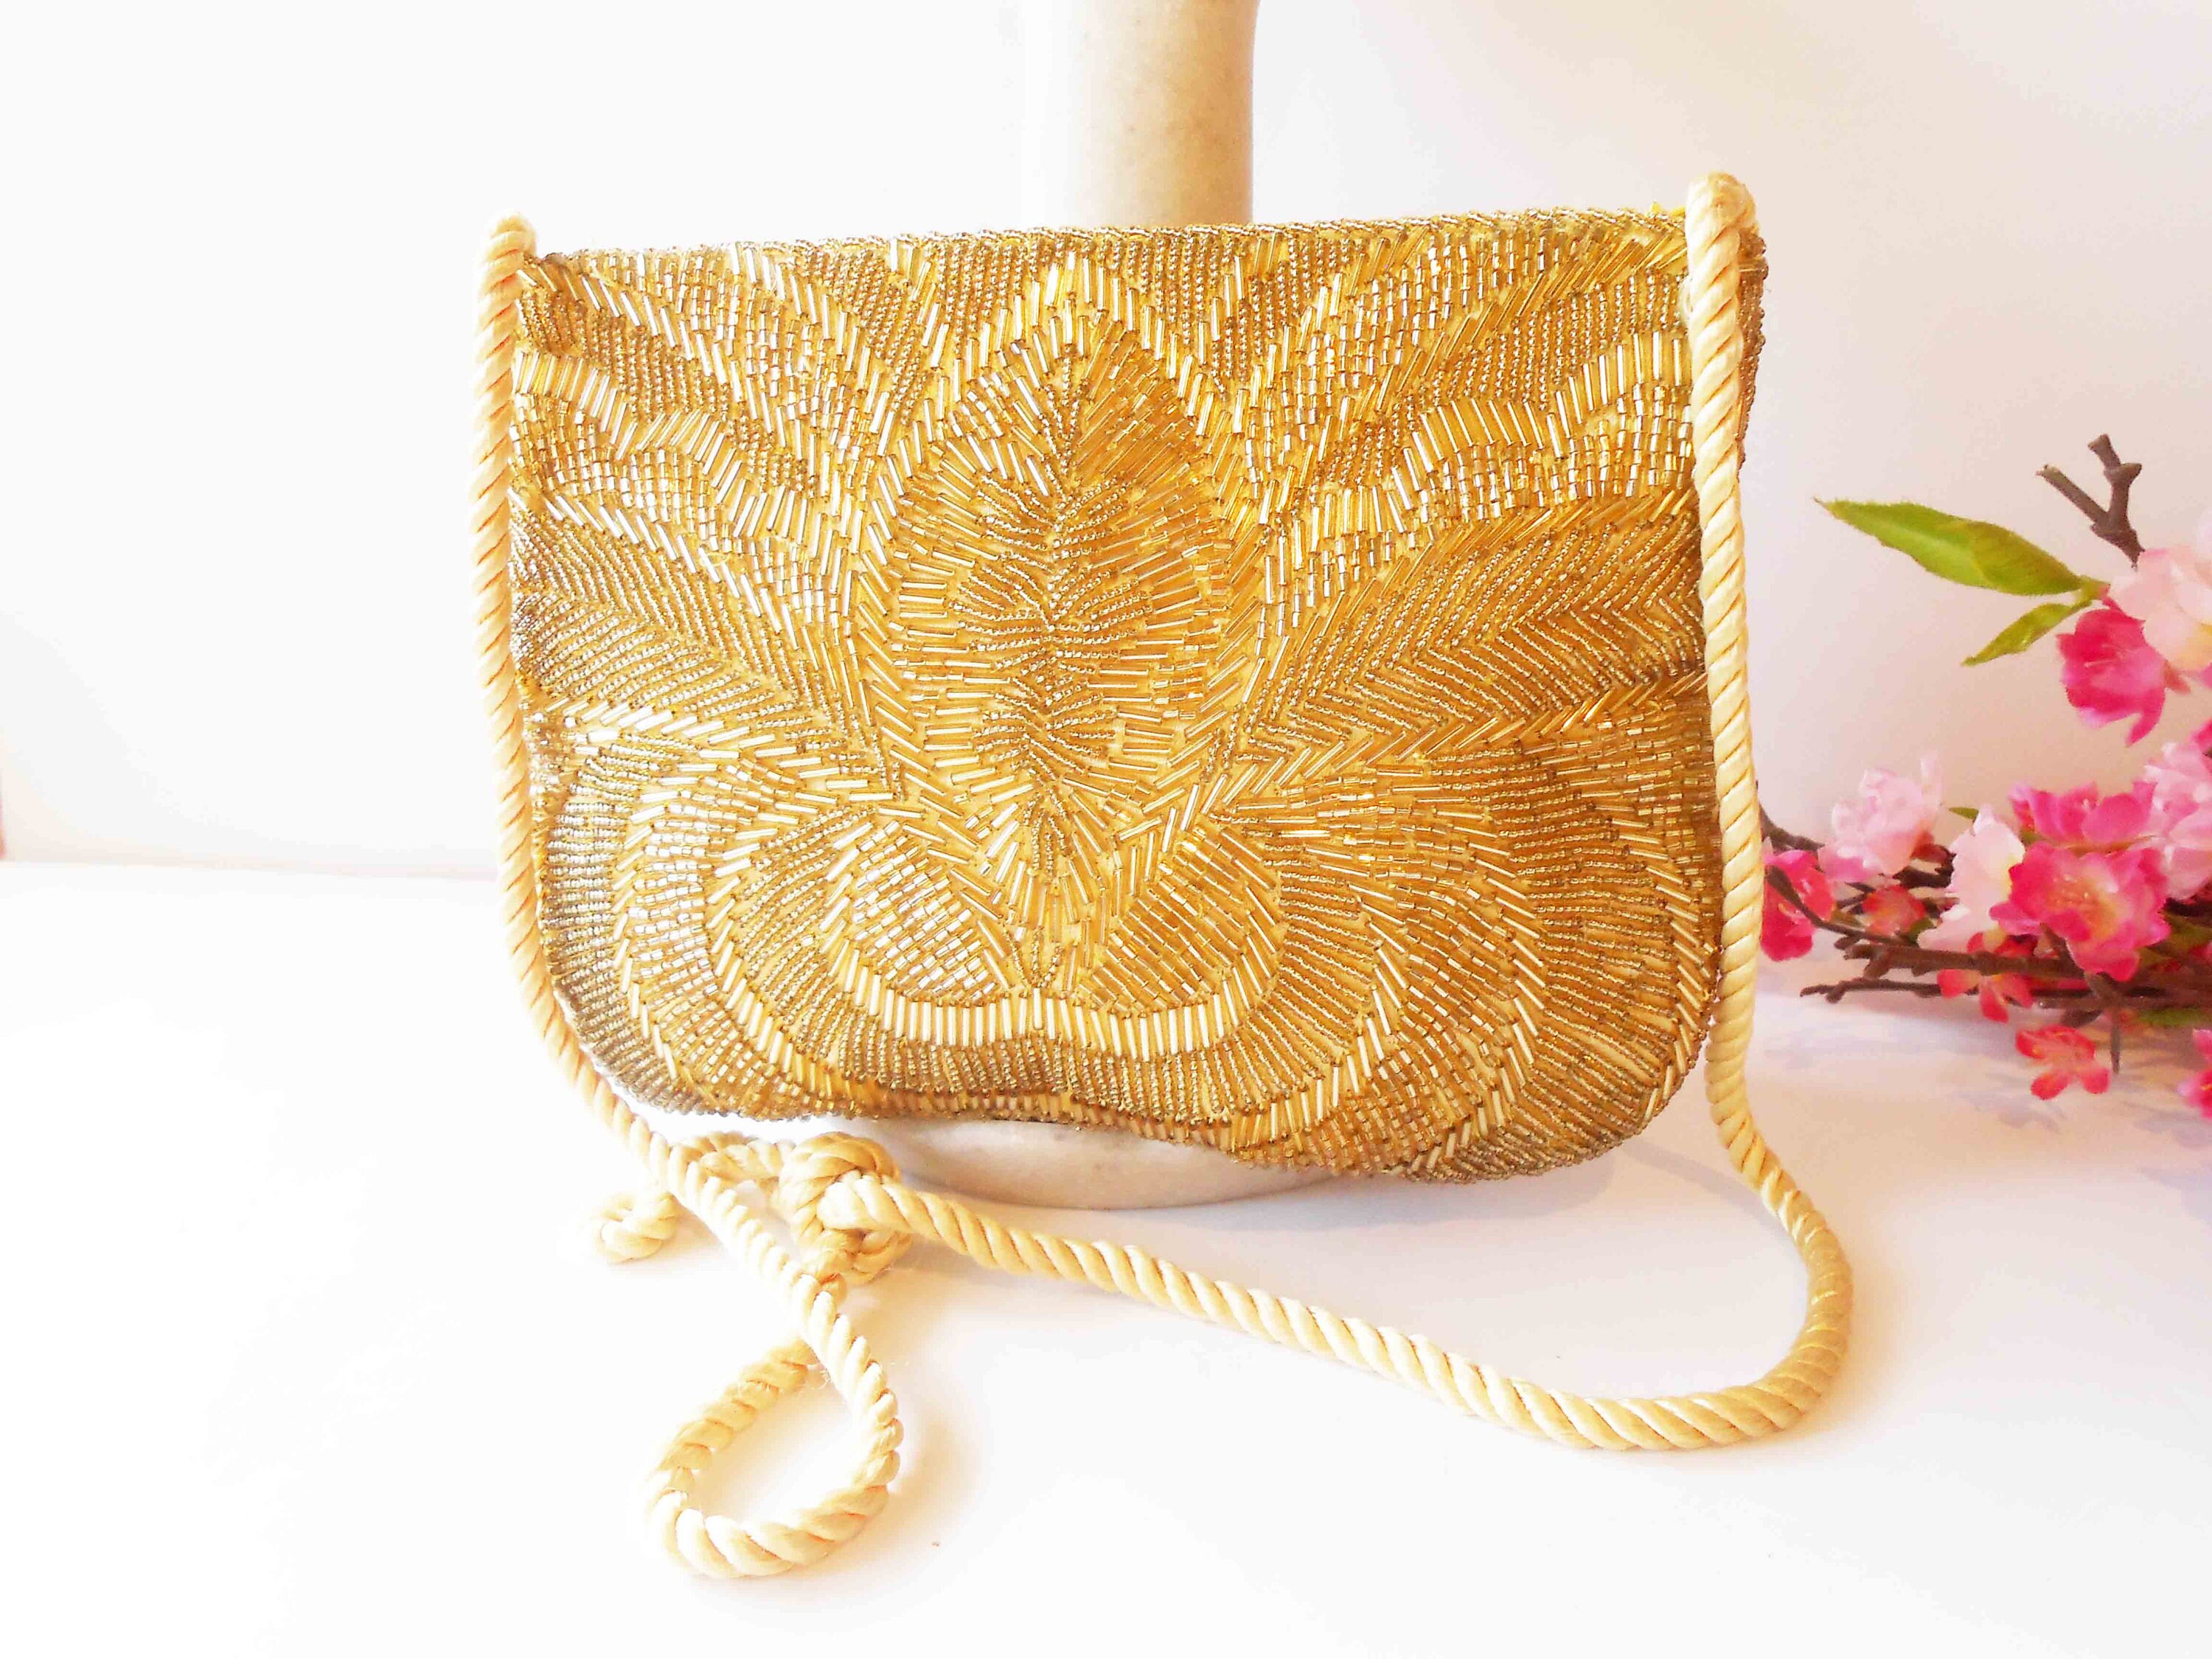 WHITE HAND-BEADED CLUTCH PURSE WITH GOLD TONED ACCENTS